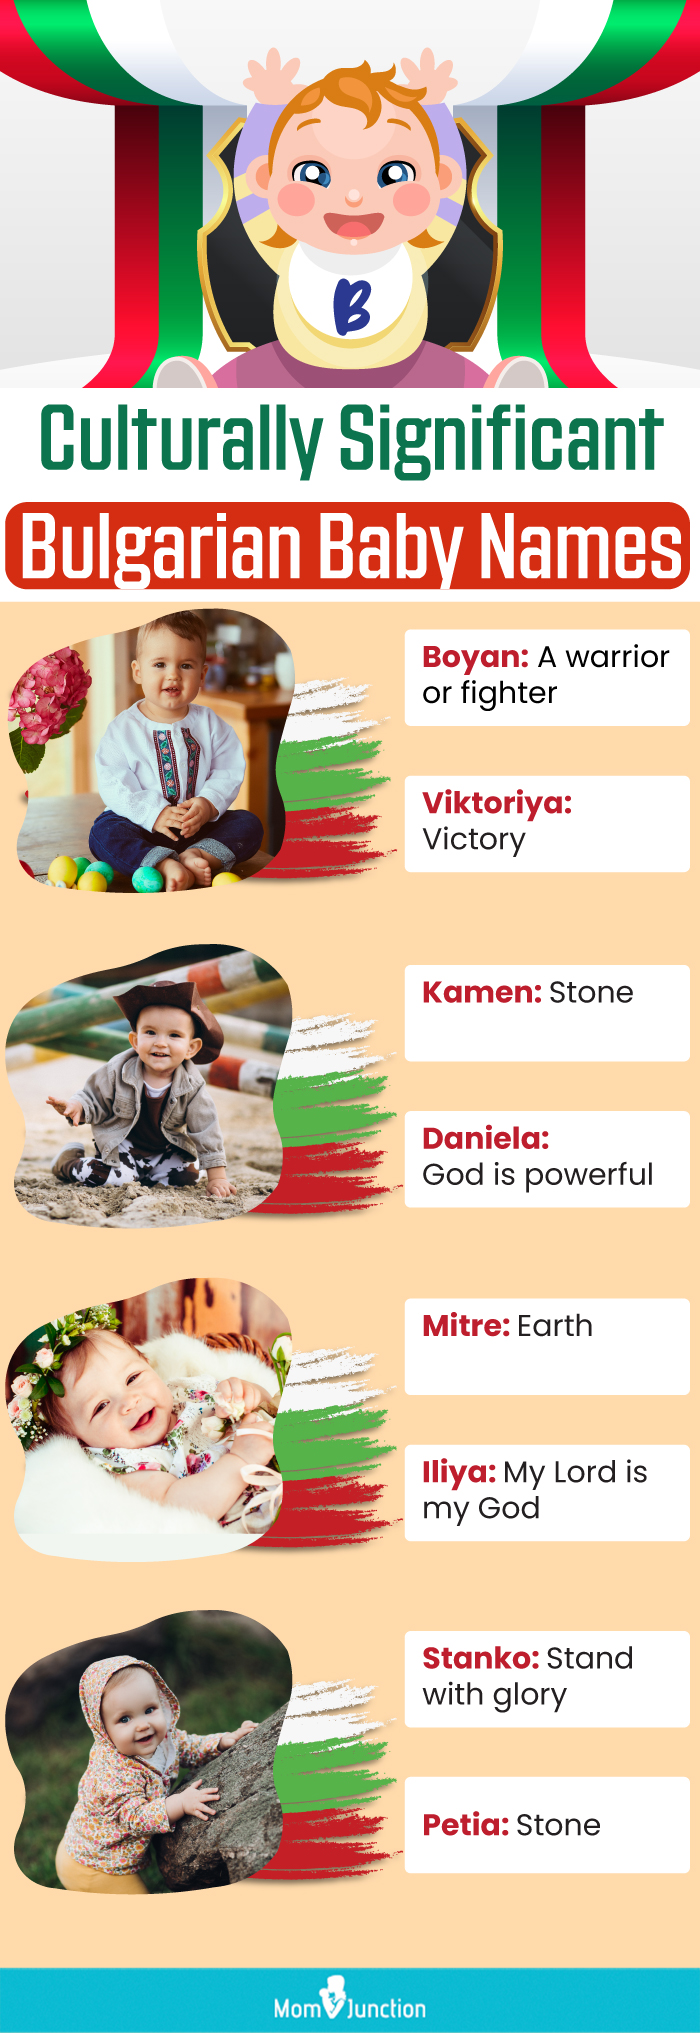 culturally significant bulgarian baby names (infographic)